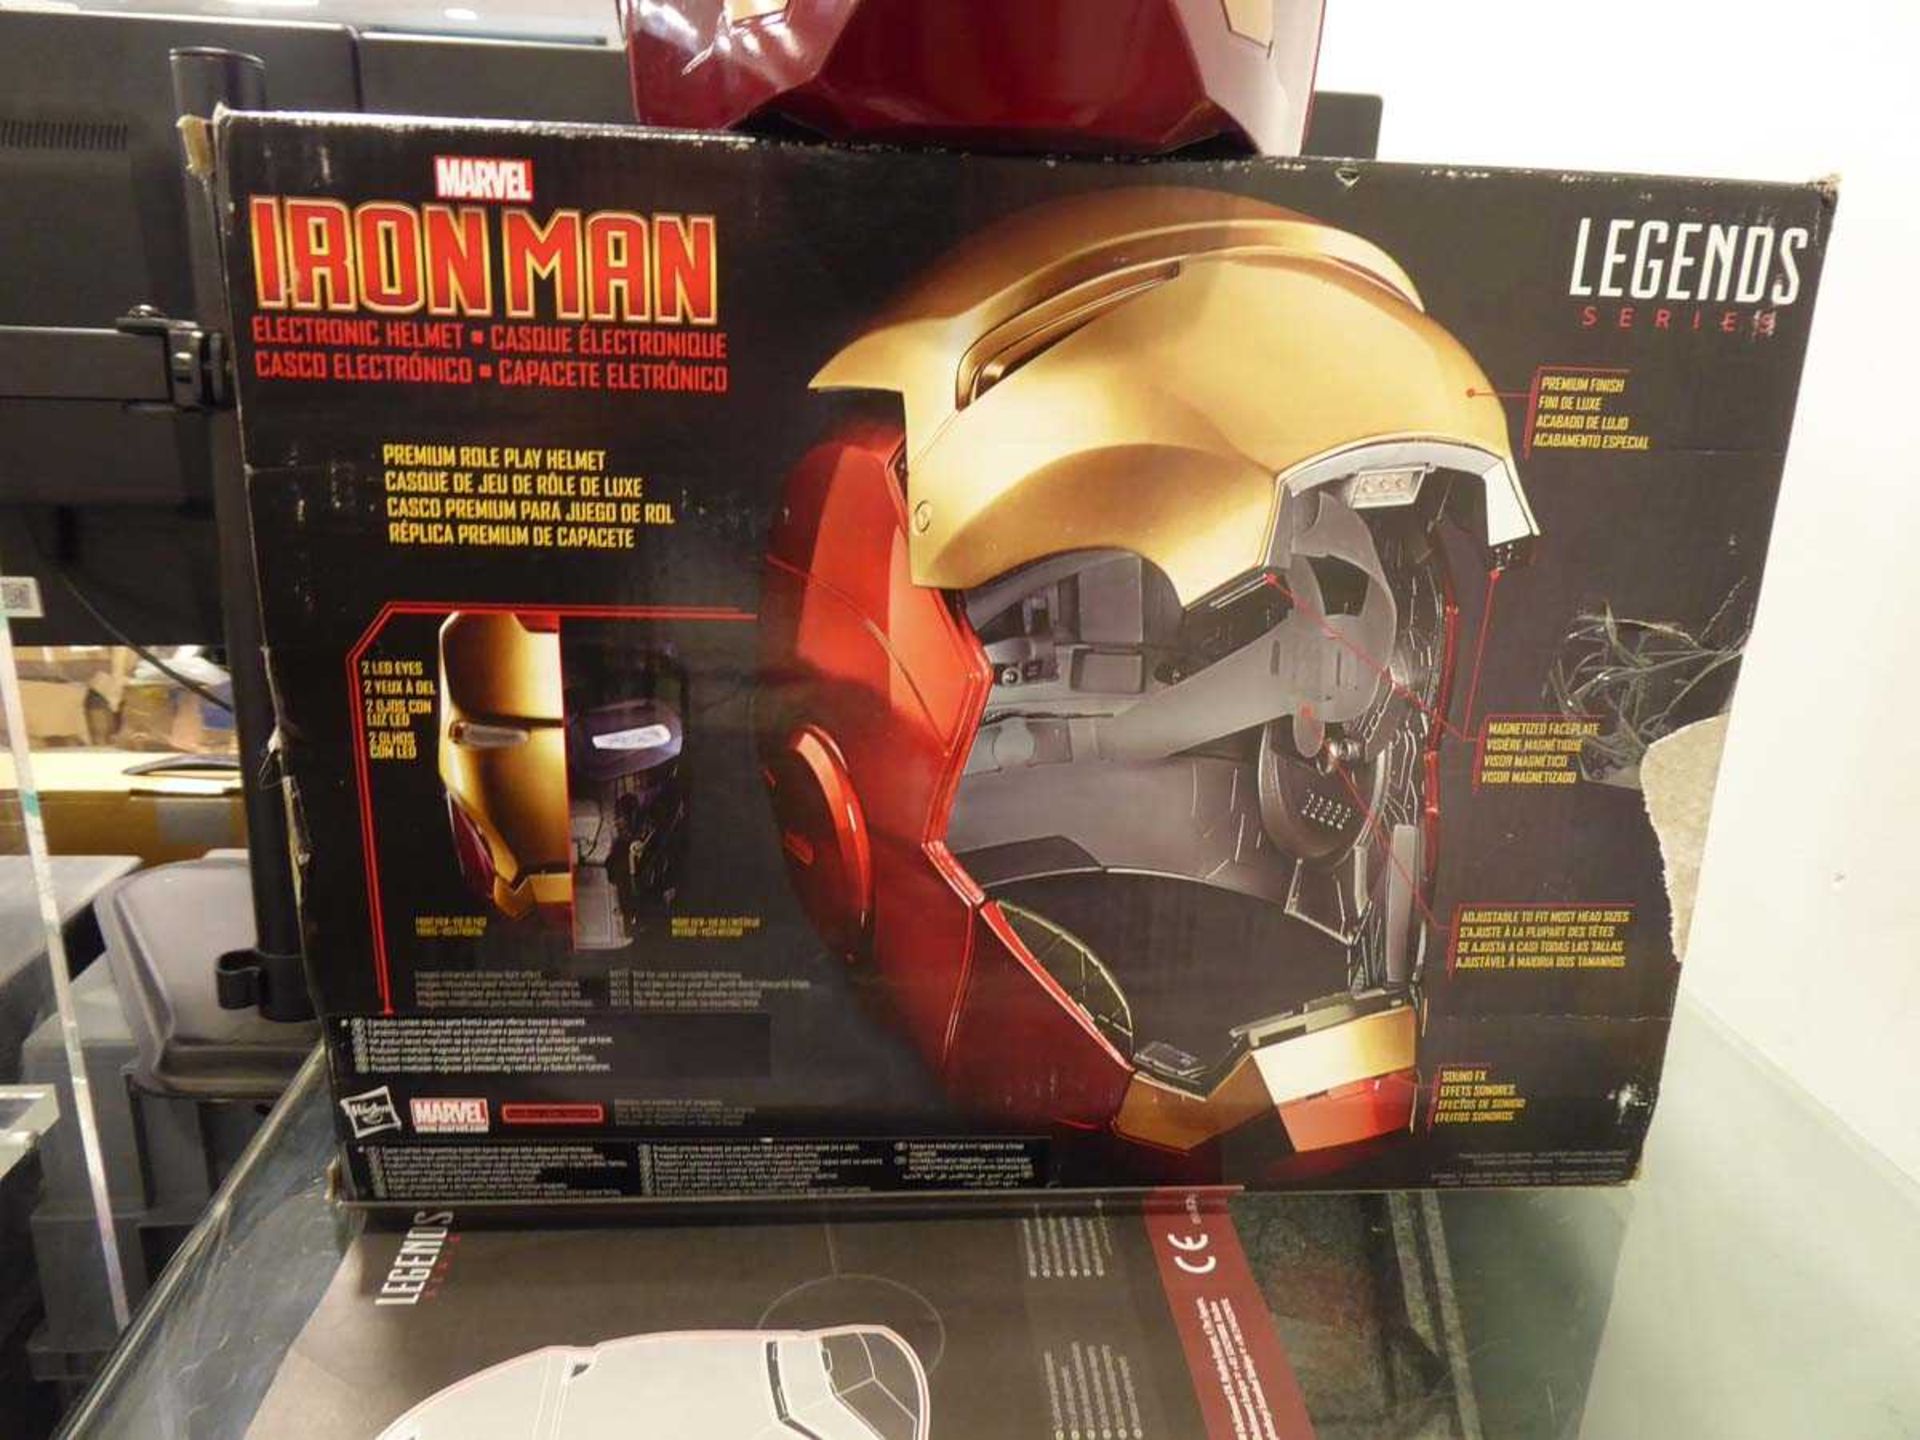 Marvel Iron Man Legend-series mask with box - Image 2 of 2